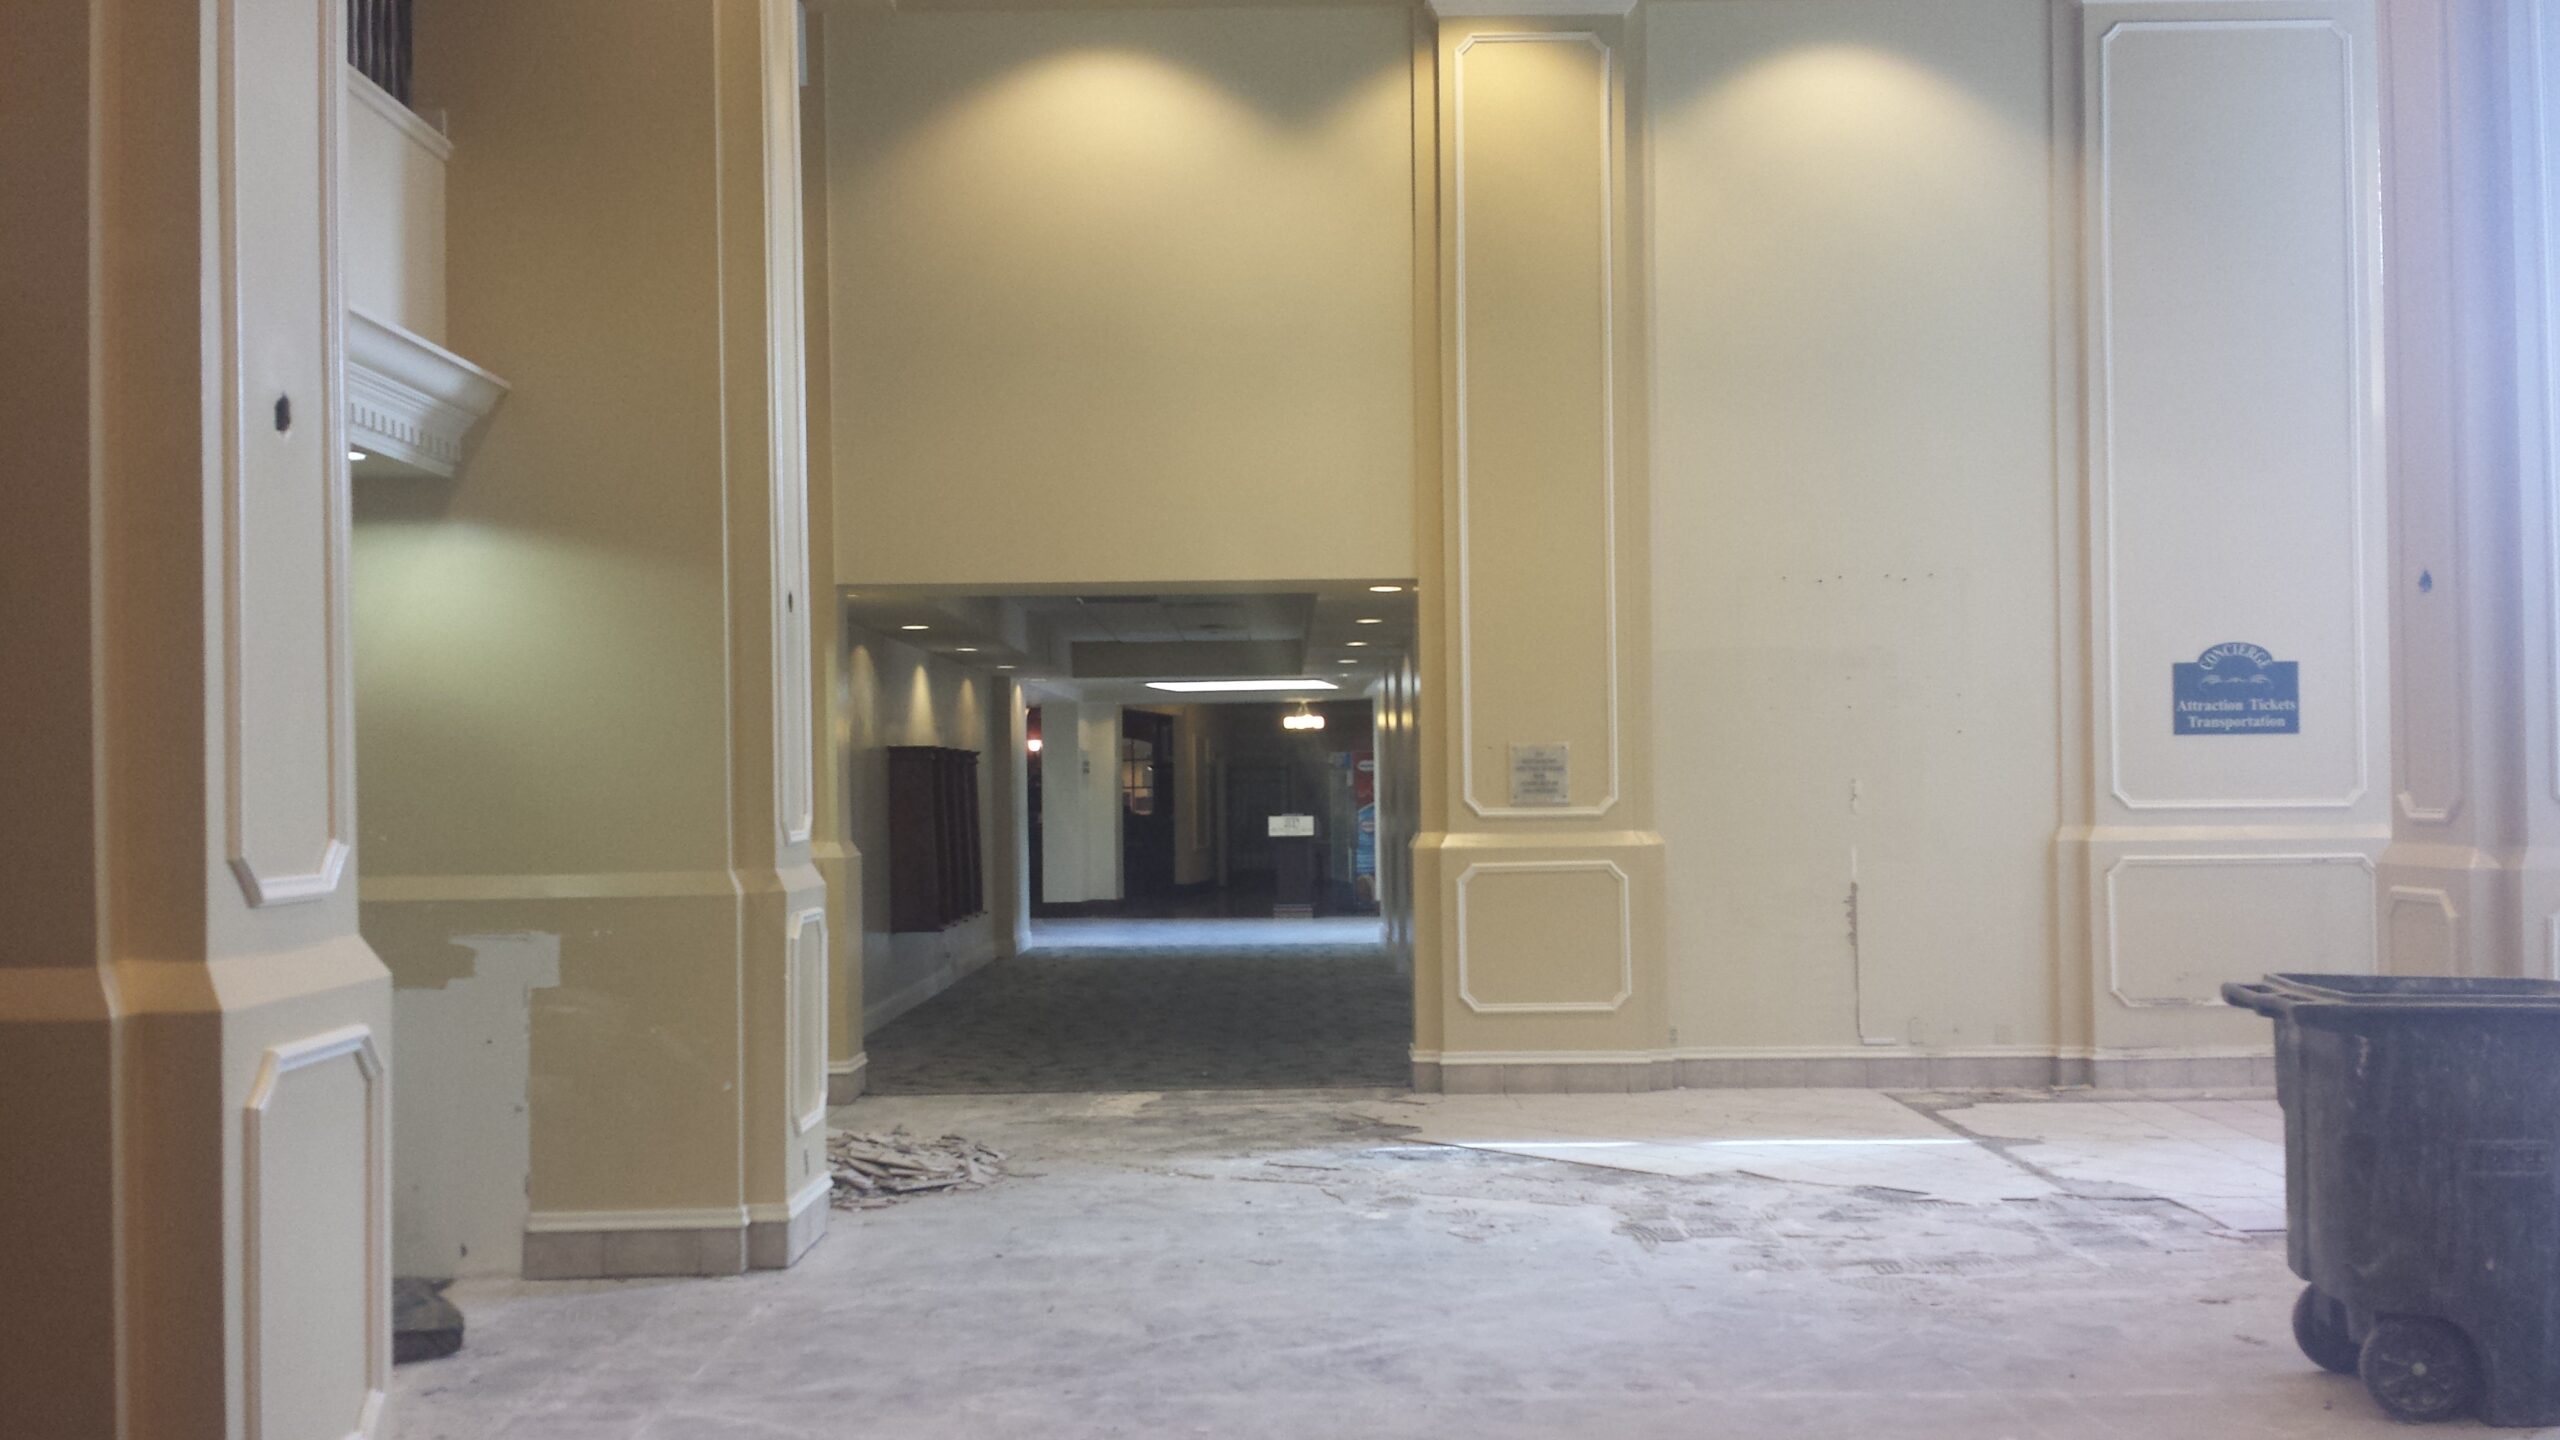 An old lobby being renovated